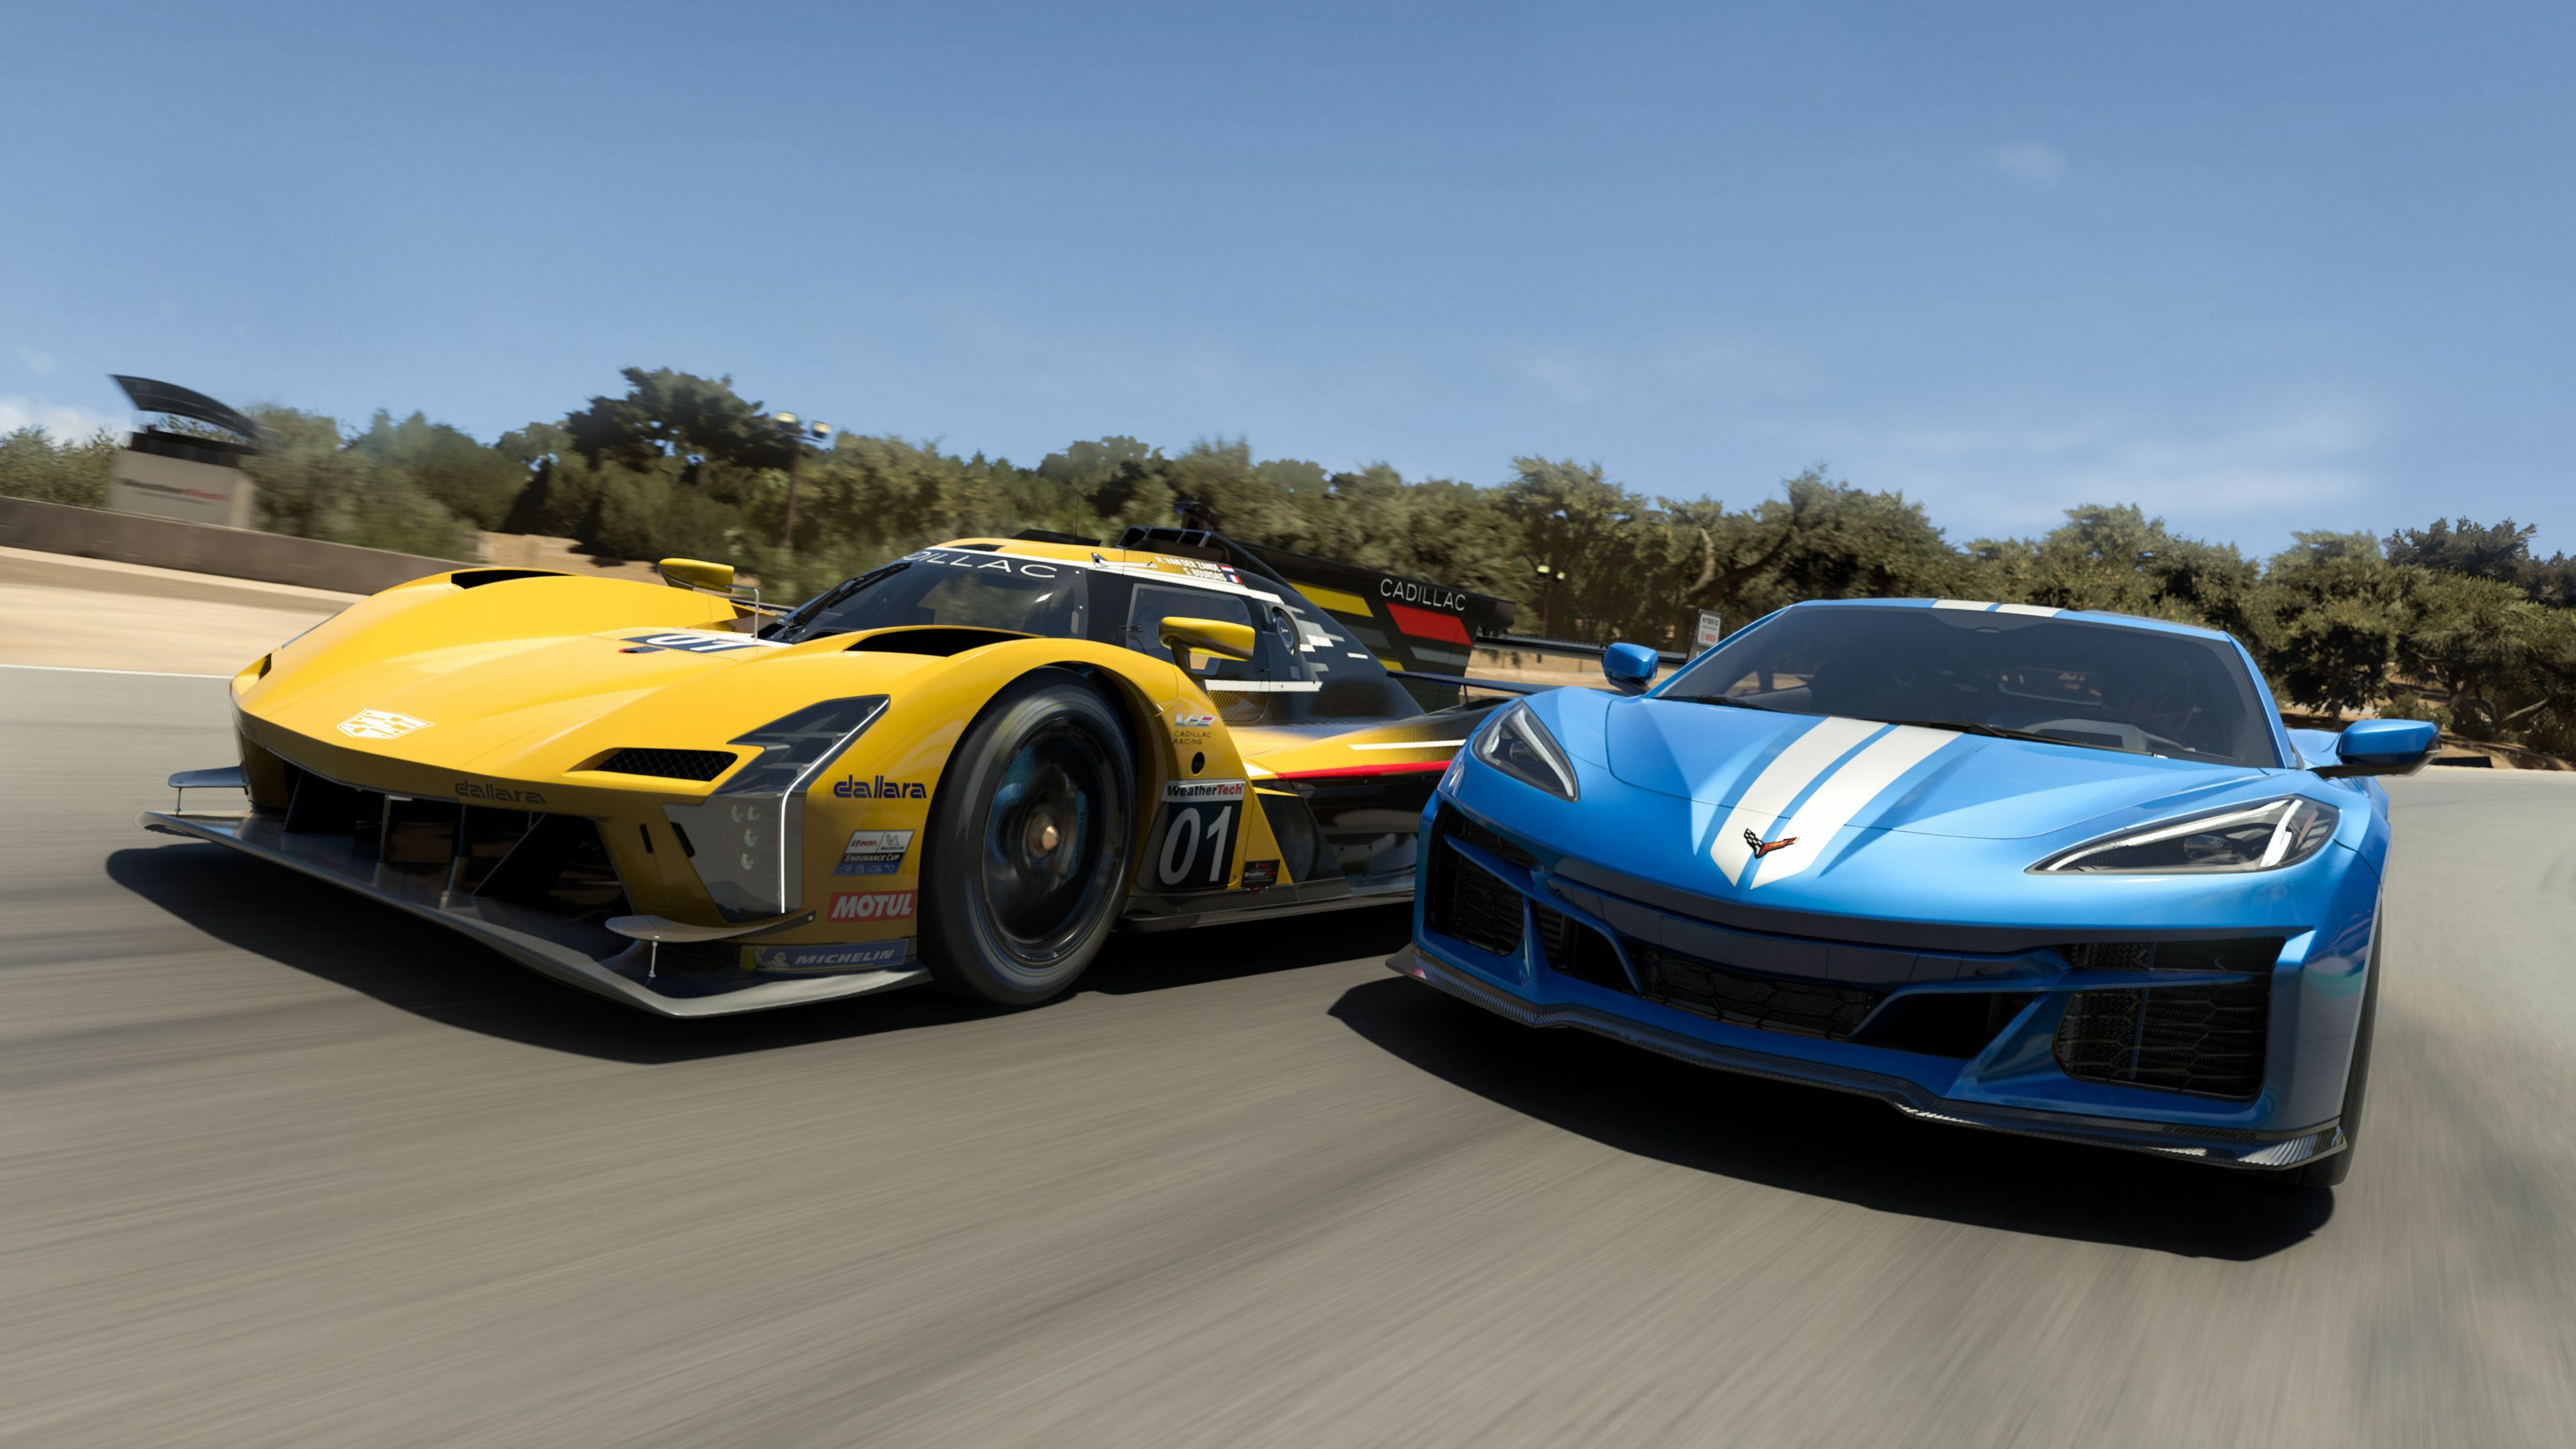 Forza Motorsport 7 adds new IndyCars, tries to fix multiplayer